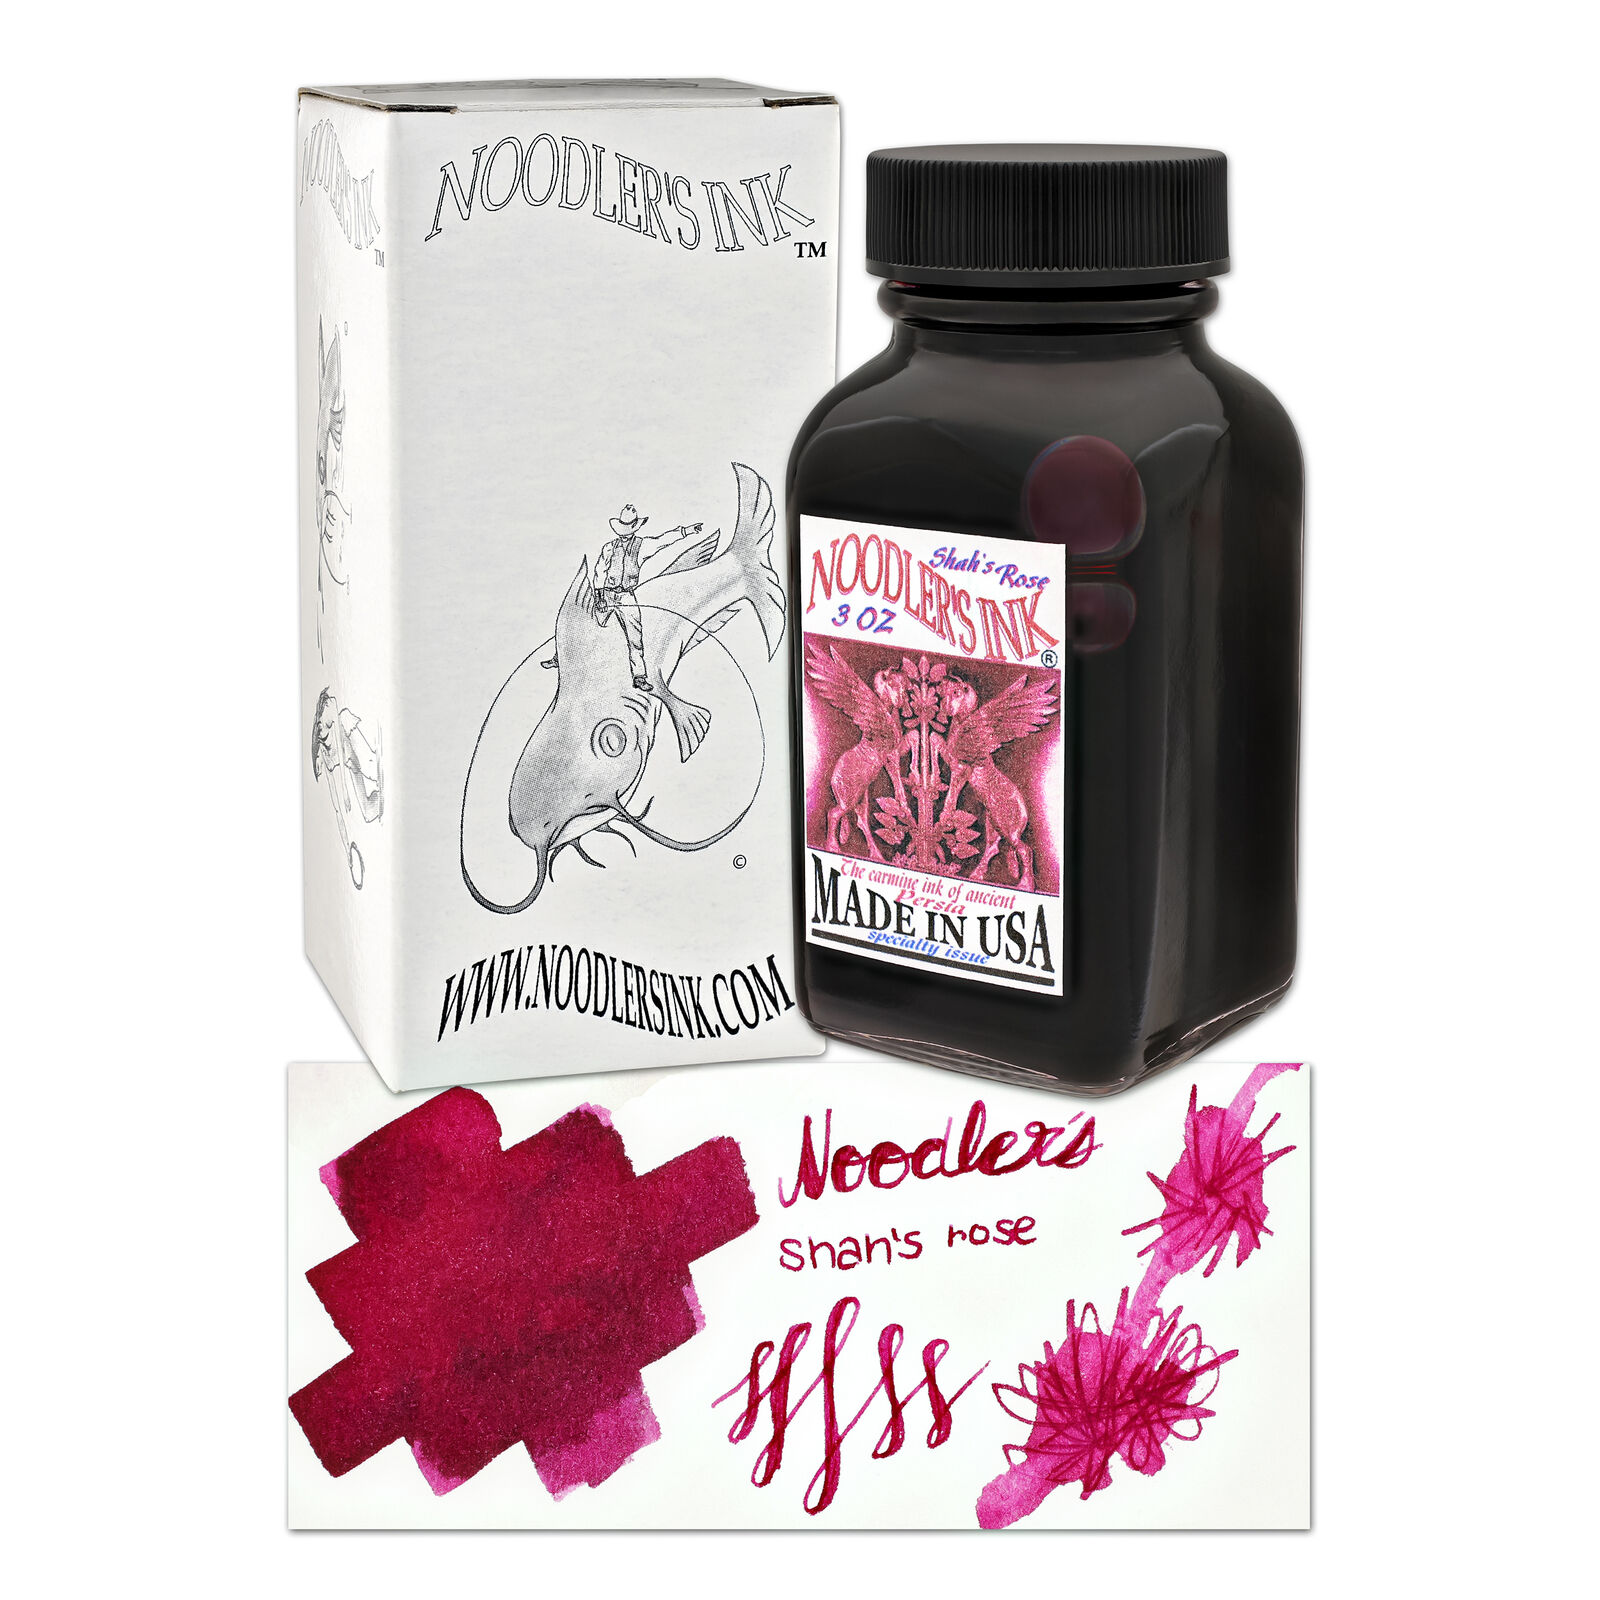 Noodler's Bottled Ink for Fountain Pens in Pearl Diver Coral - 3oz - NEW in Box